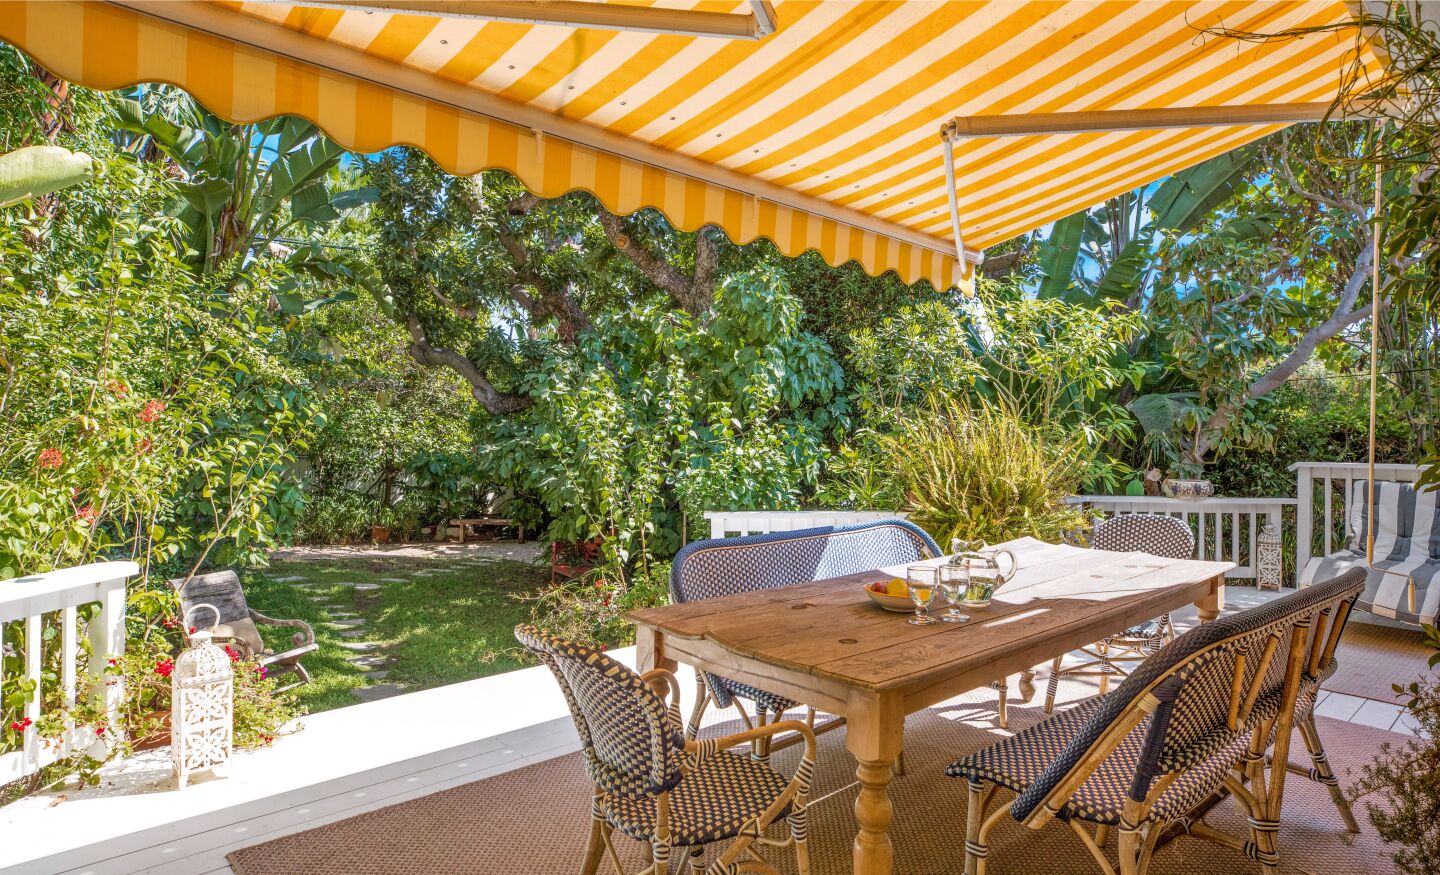 A striped awning shades the back patio.